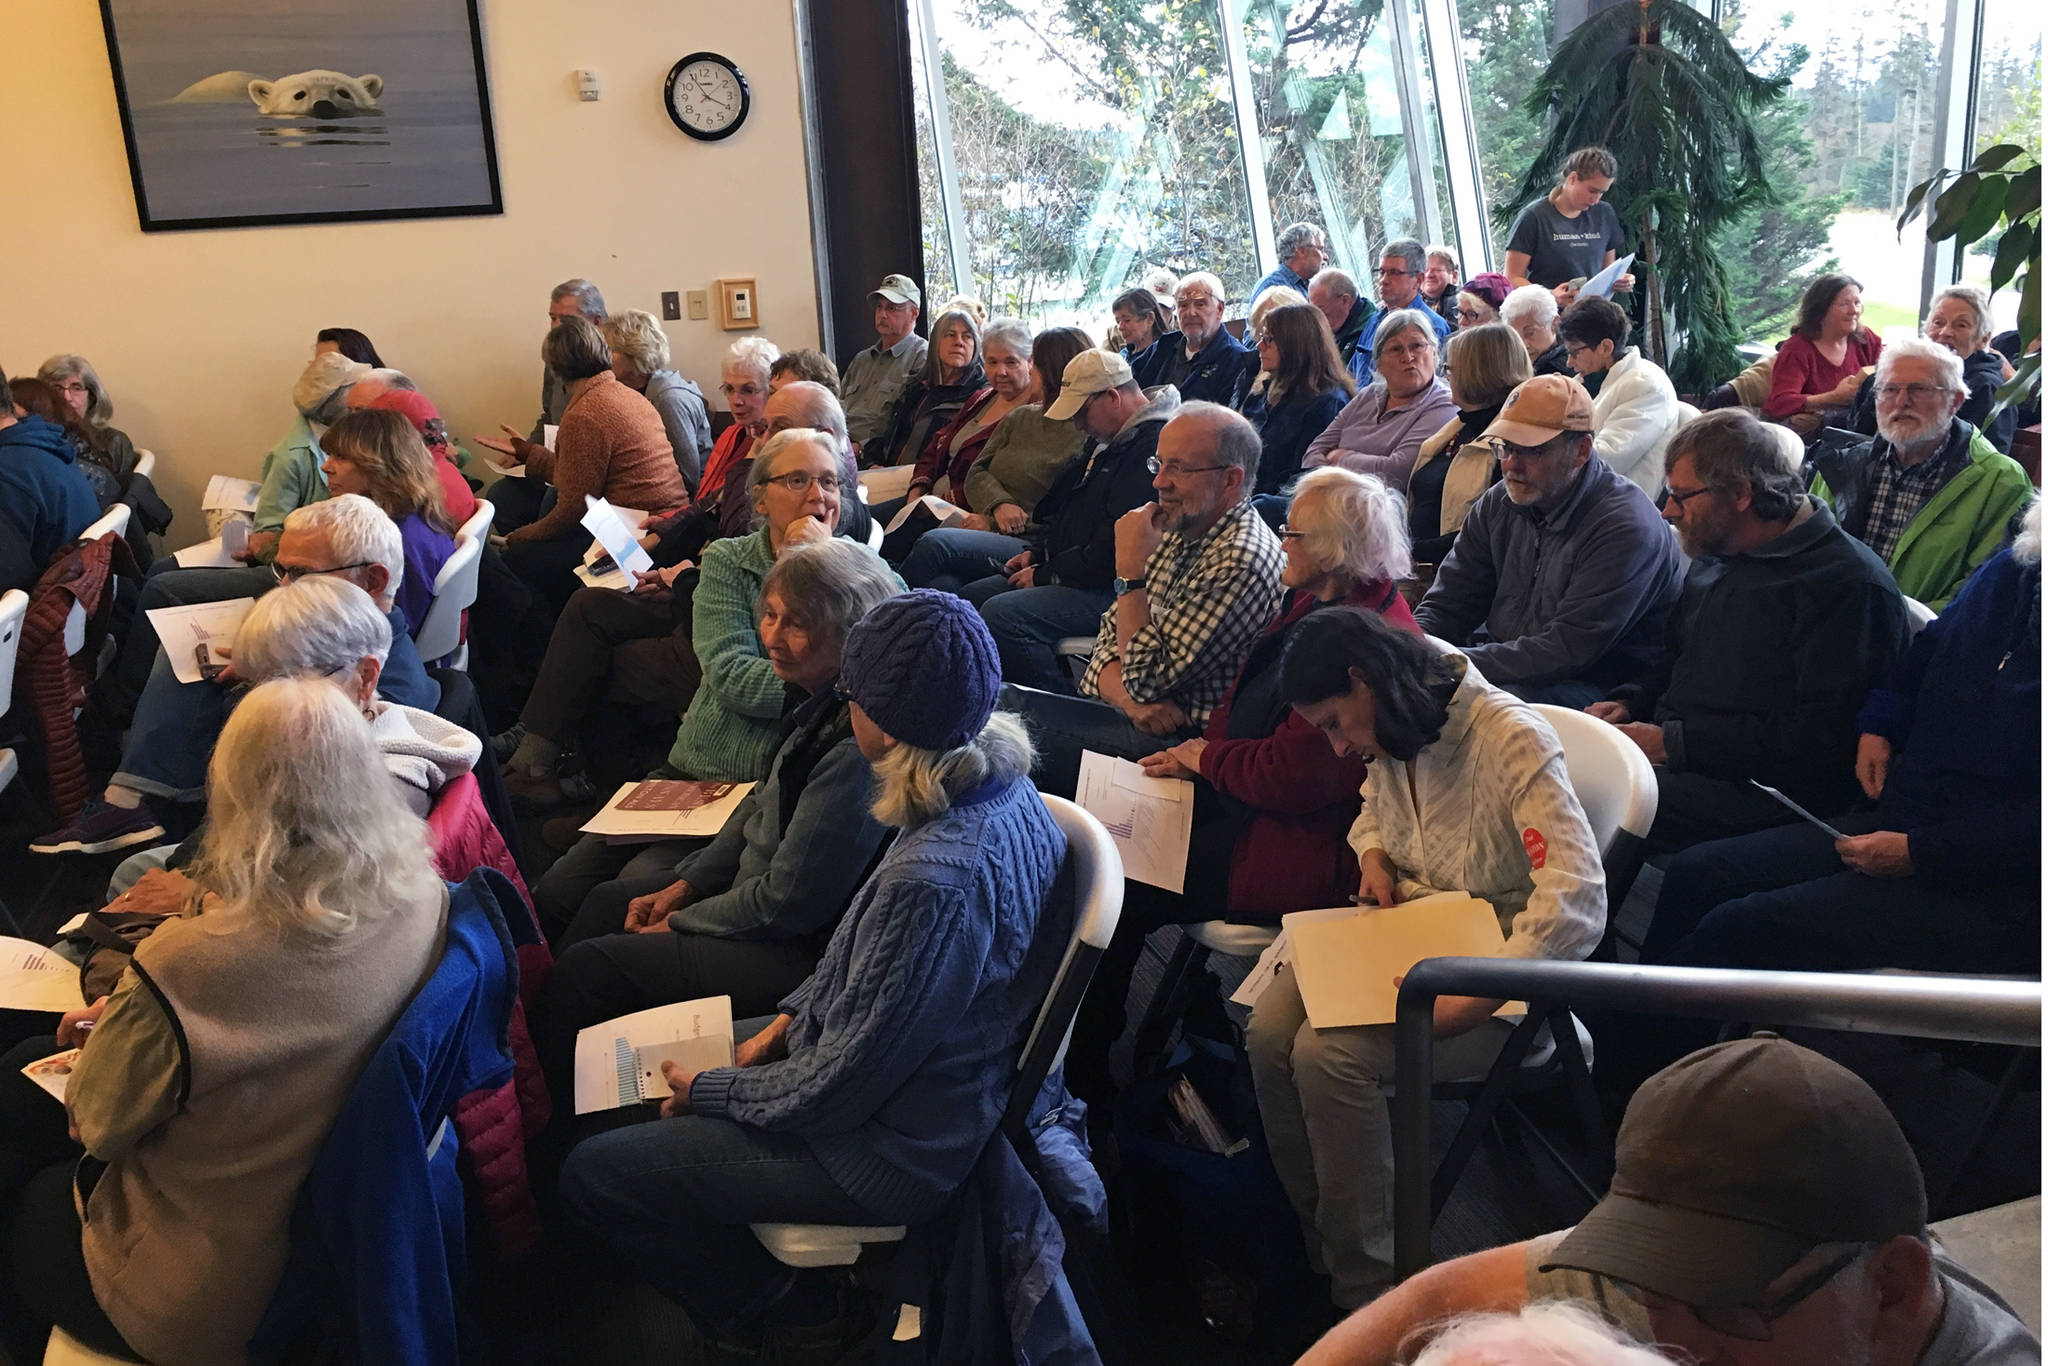 Area residents mingle and talk while waiting for a candidate forum to start Saturday, Oct. 20, 2018 at the Homer Public Library in Homer, Alaska. The two candidates for the Alaska House of Representatives District 31 seat, Rep. Paul Seaton and Sarah Vance, responded to questions from the audience. (Photo by Megan Pacer/Homer News)